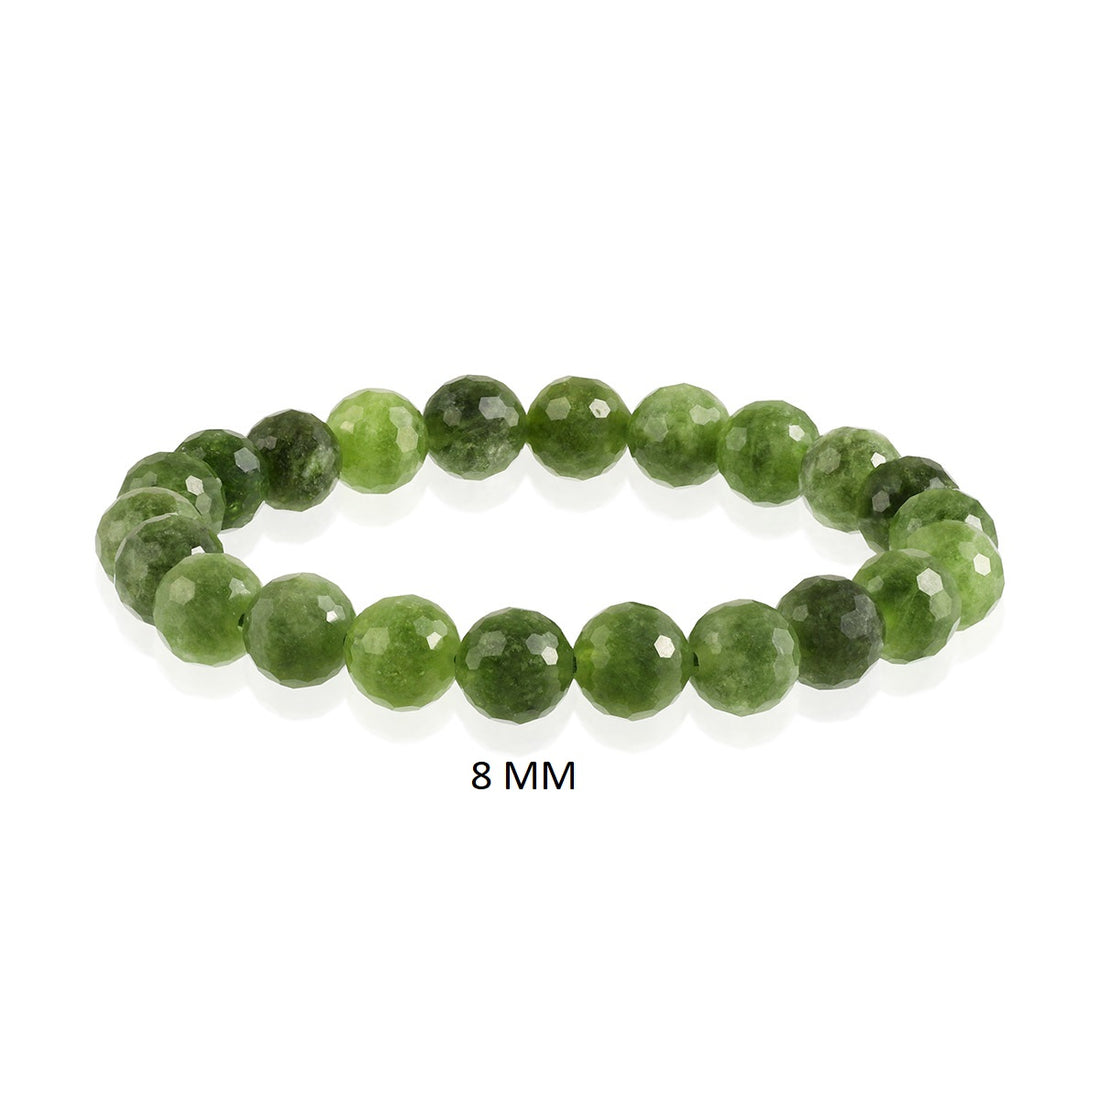 Symbolic representation of heart chakra activation and emotional healing with the Green Quartz Bracelet